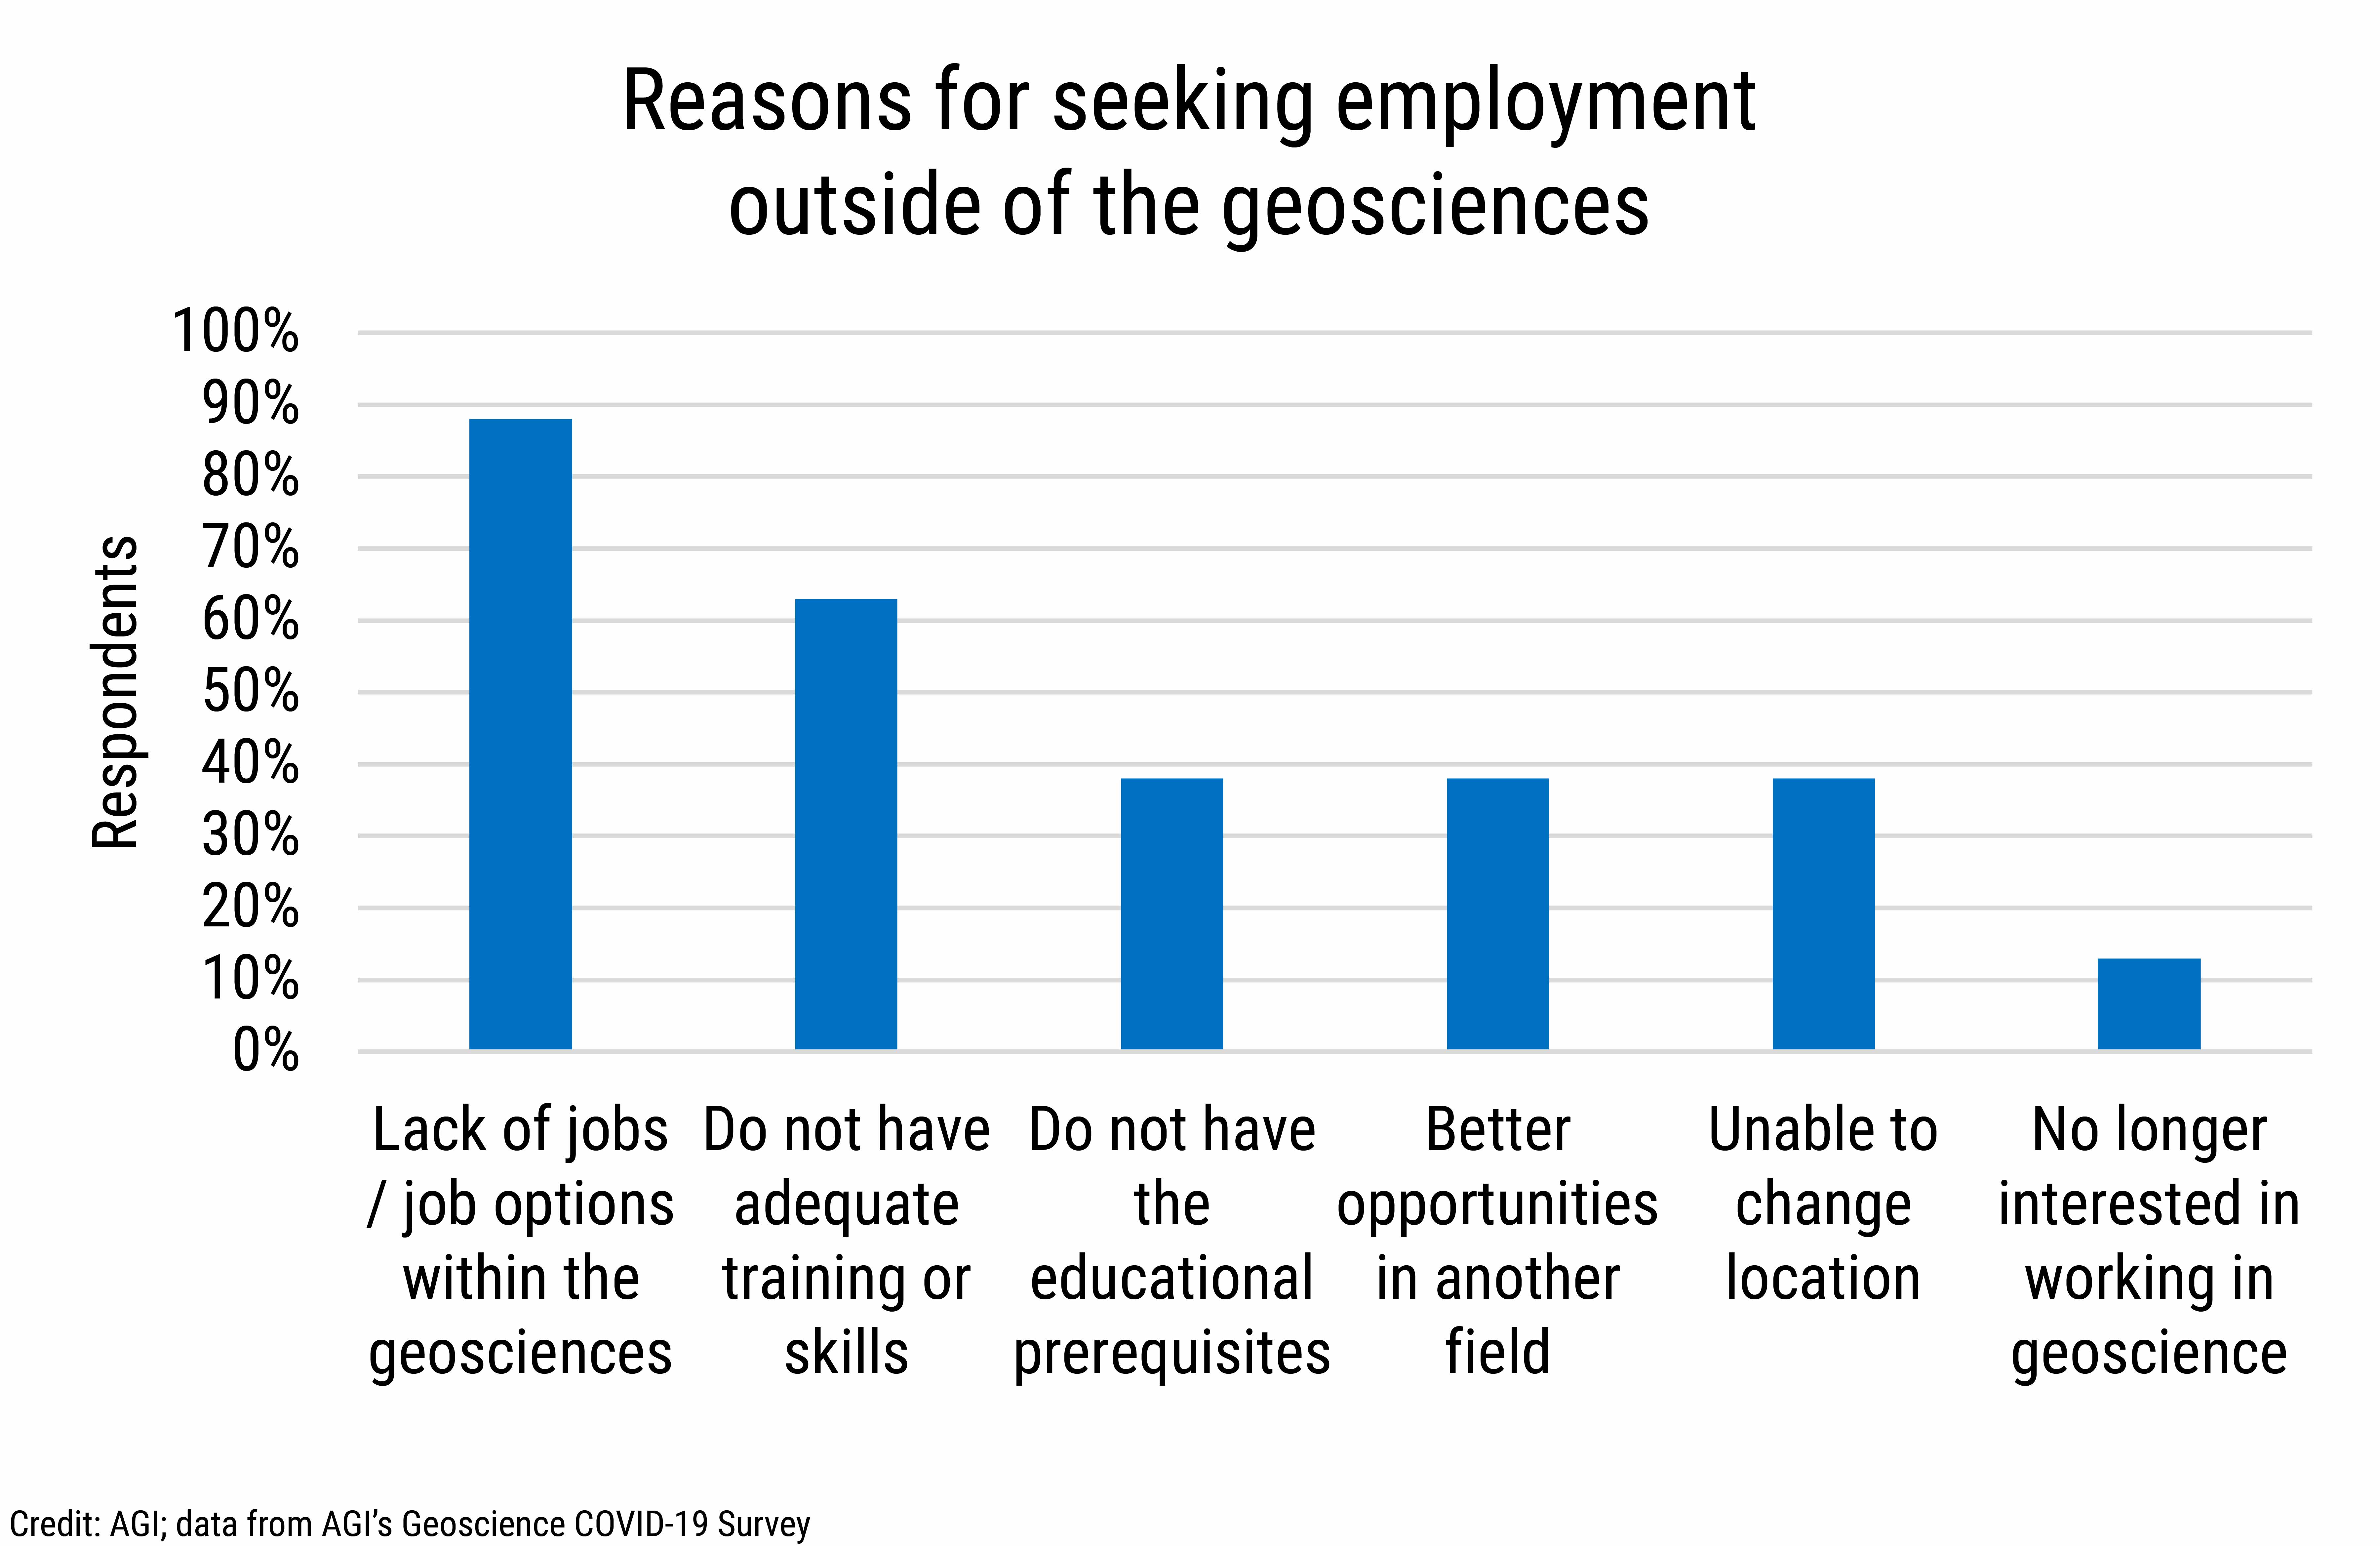 DB_2021-026 chart 11: Reasons for seeking employment outside of the geosciences (Credit: AGI; data from AGI's Geoscience COVID-19 Survey)